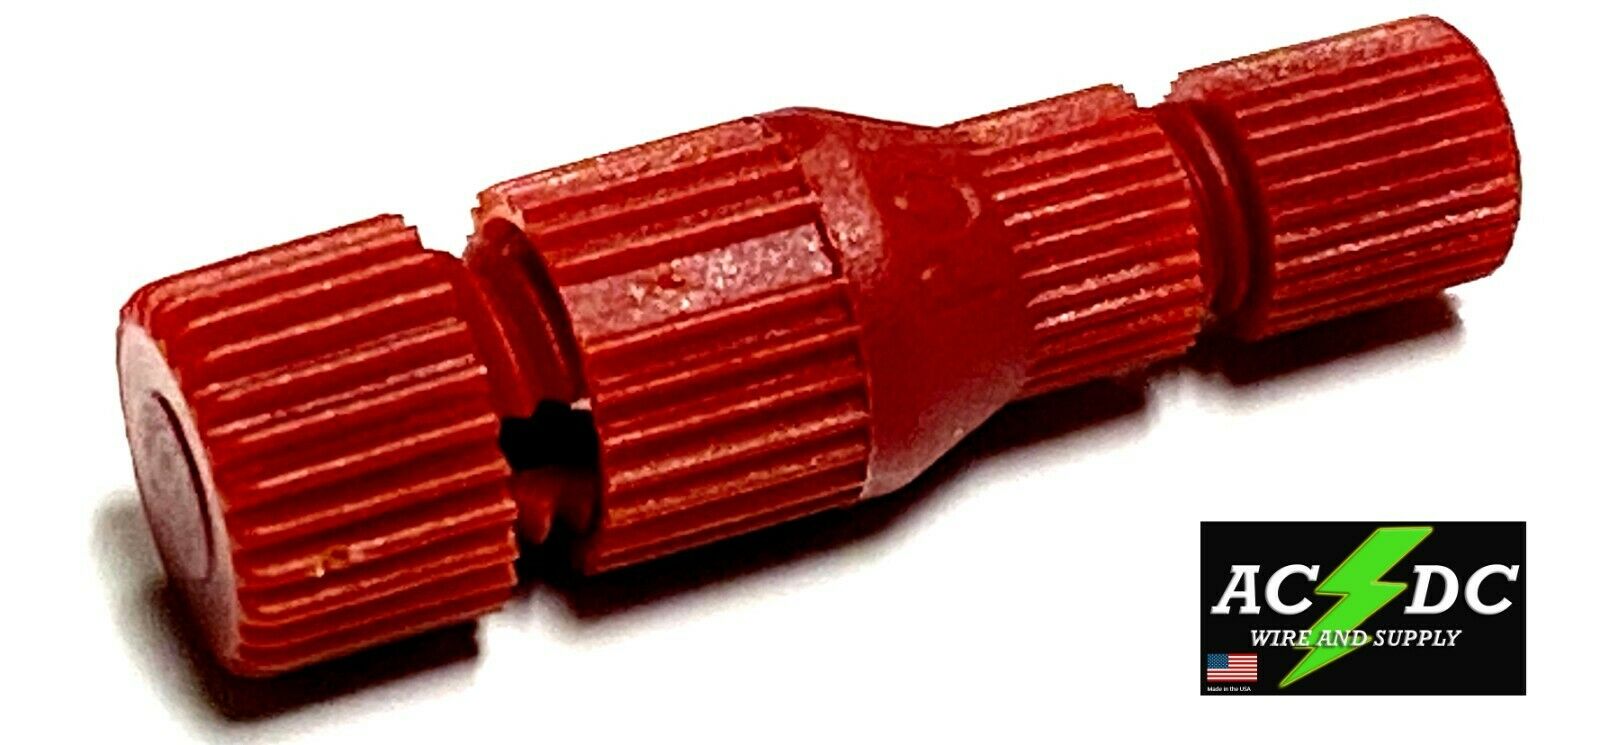 8 Pack RED Posi-Tap #PTA2022M 20-22 ga wire connector